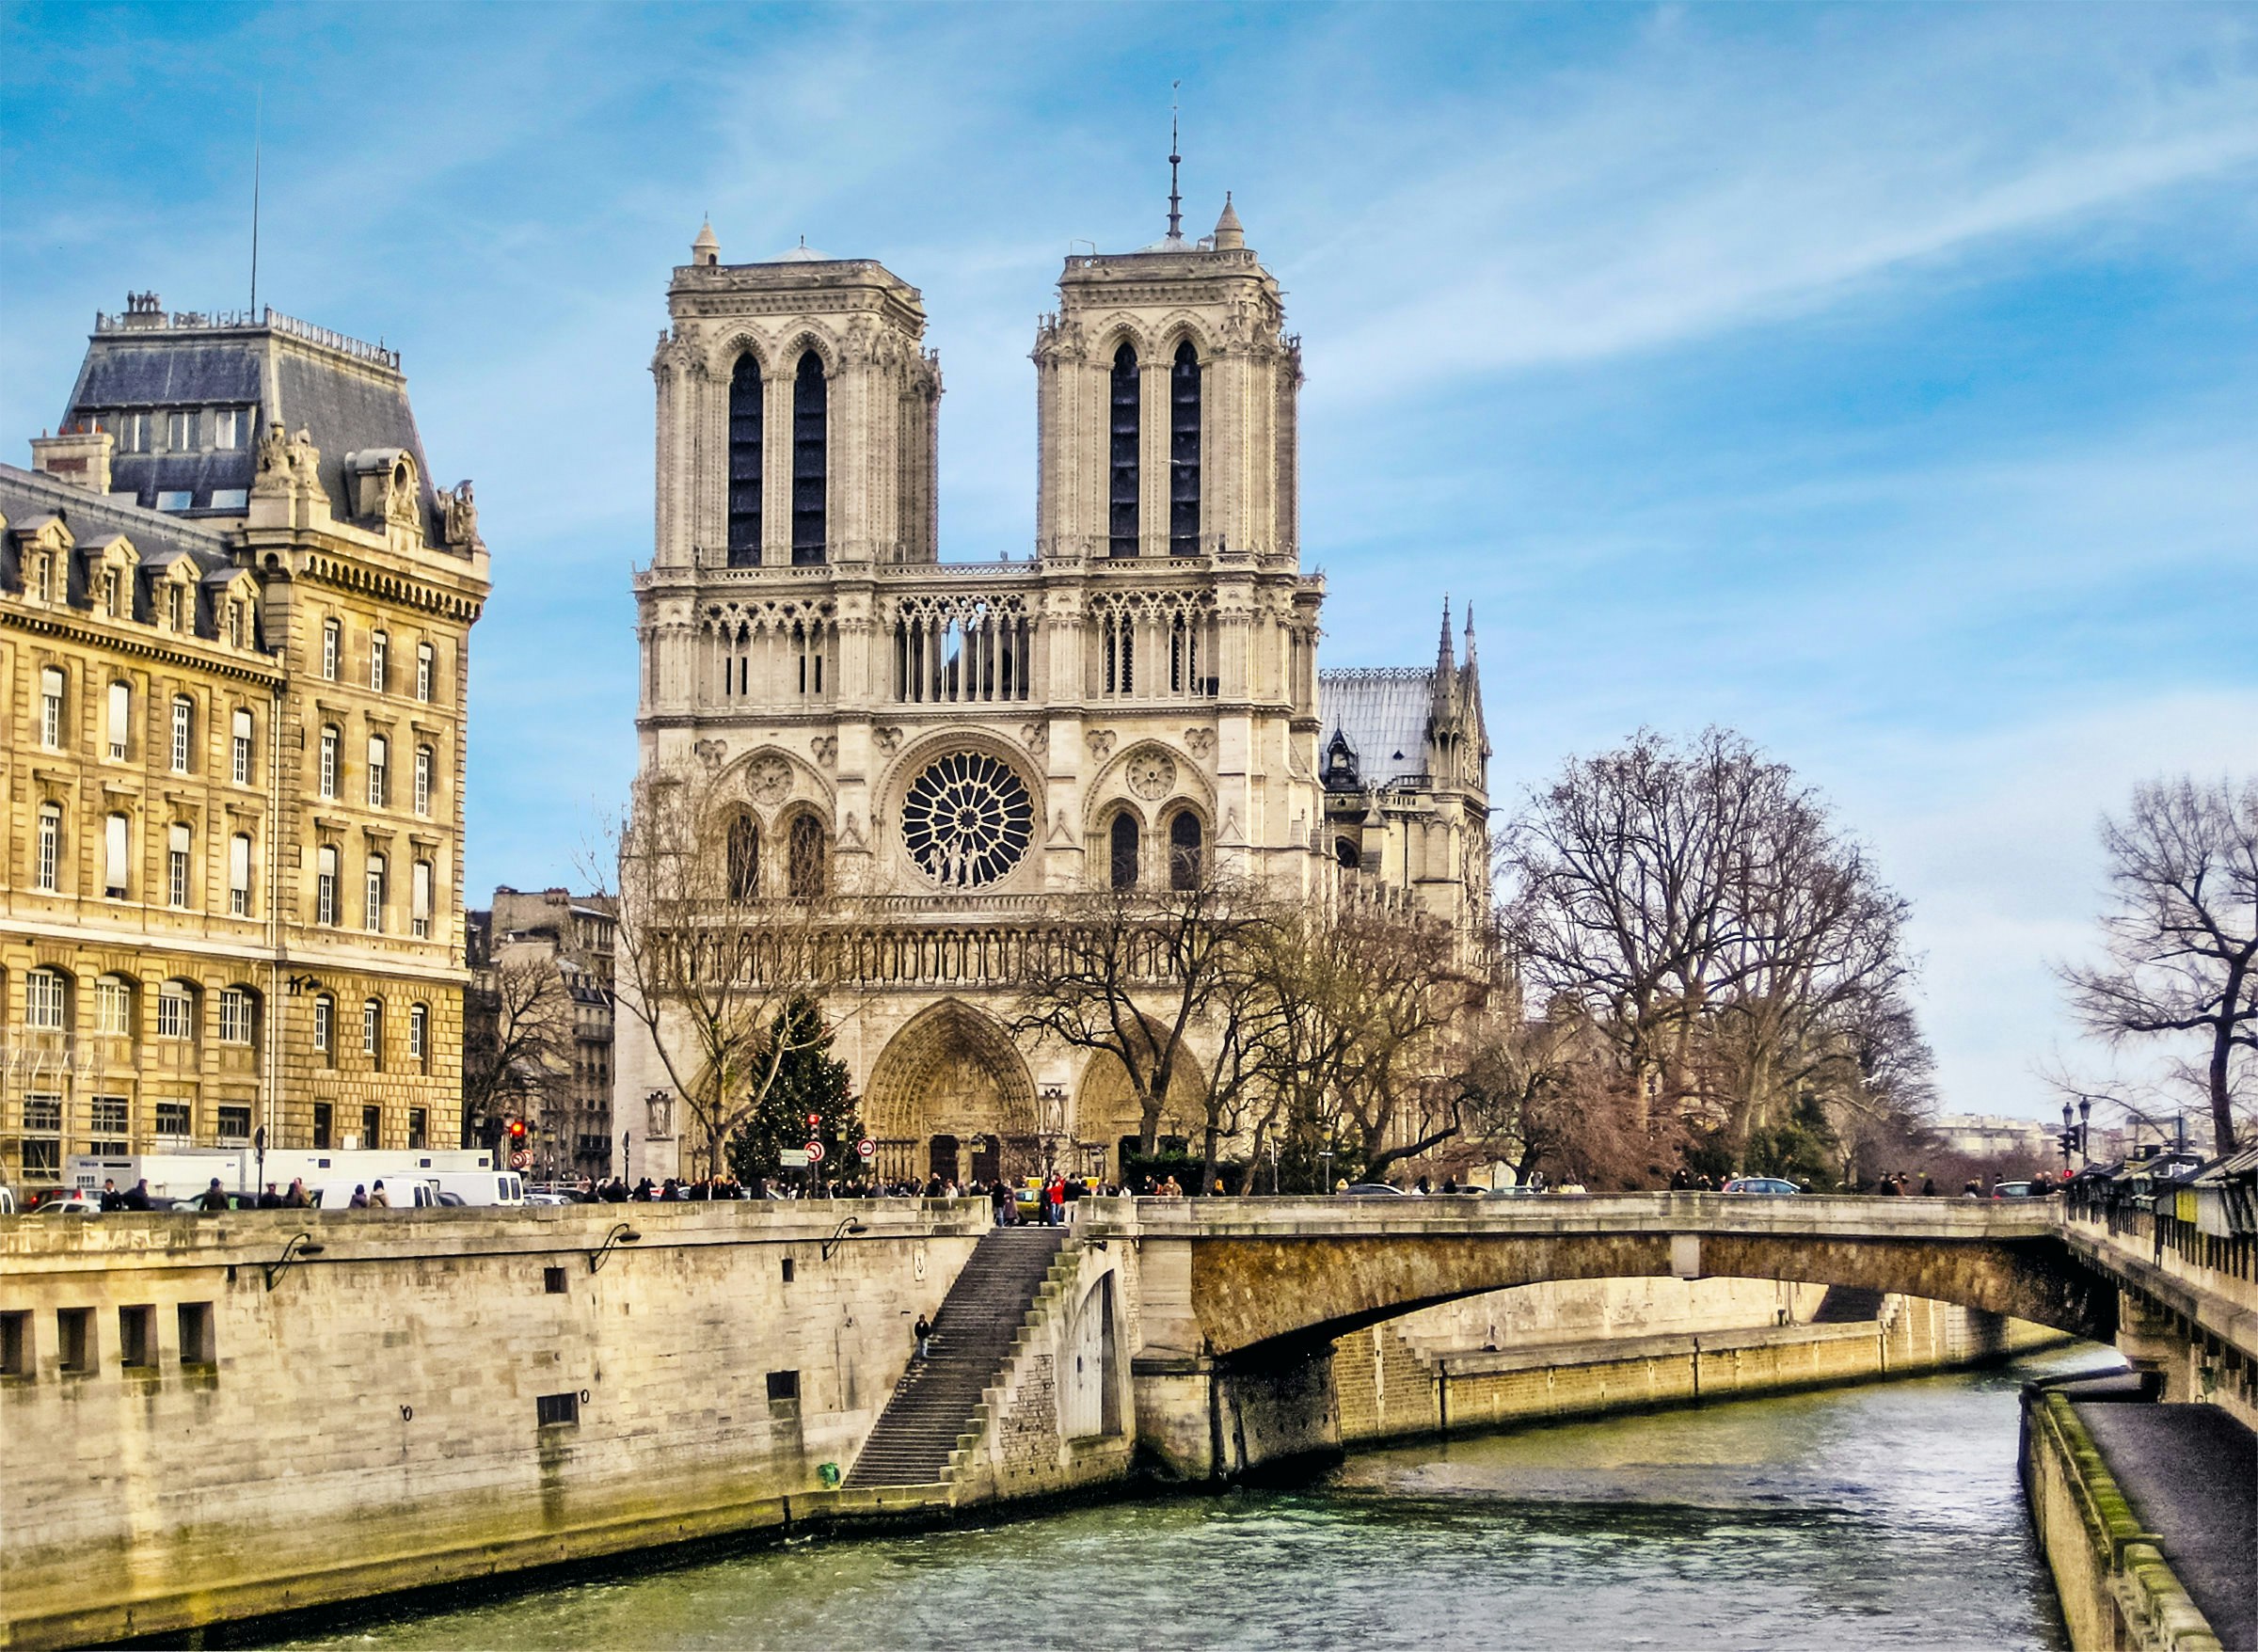 Cathedral of Notre Dame, Paris, France before the devastating fire